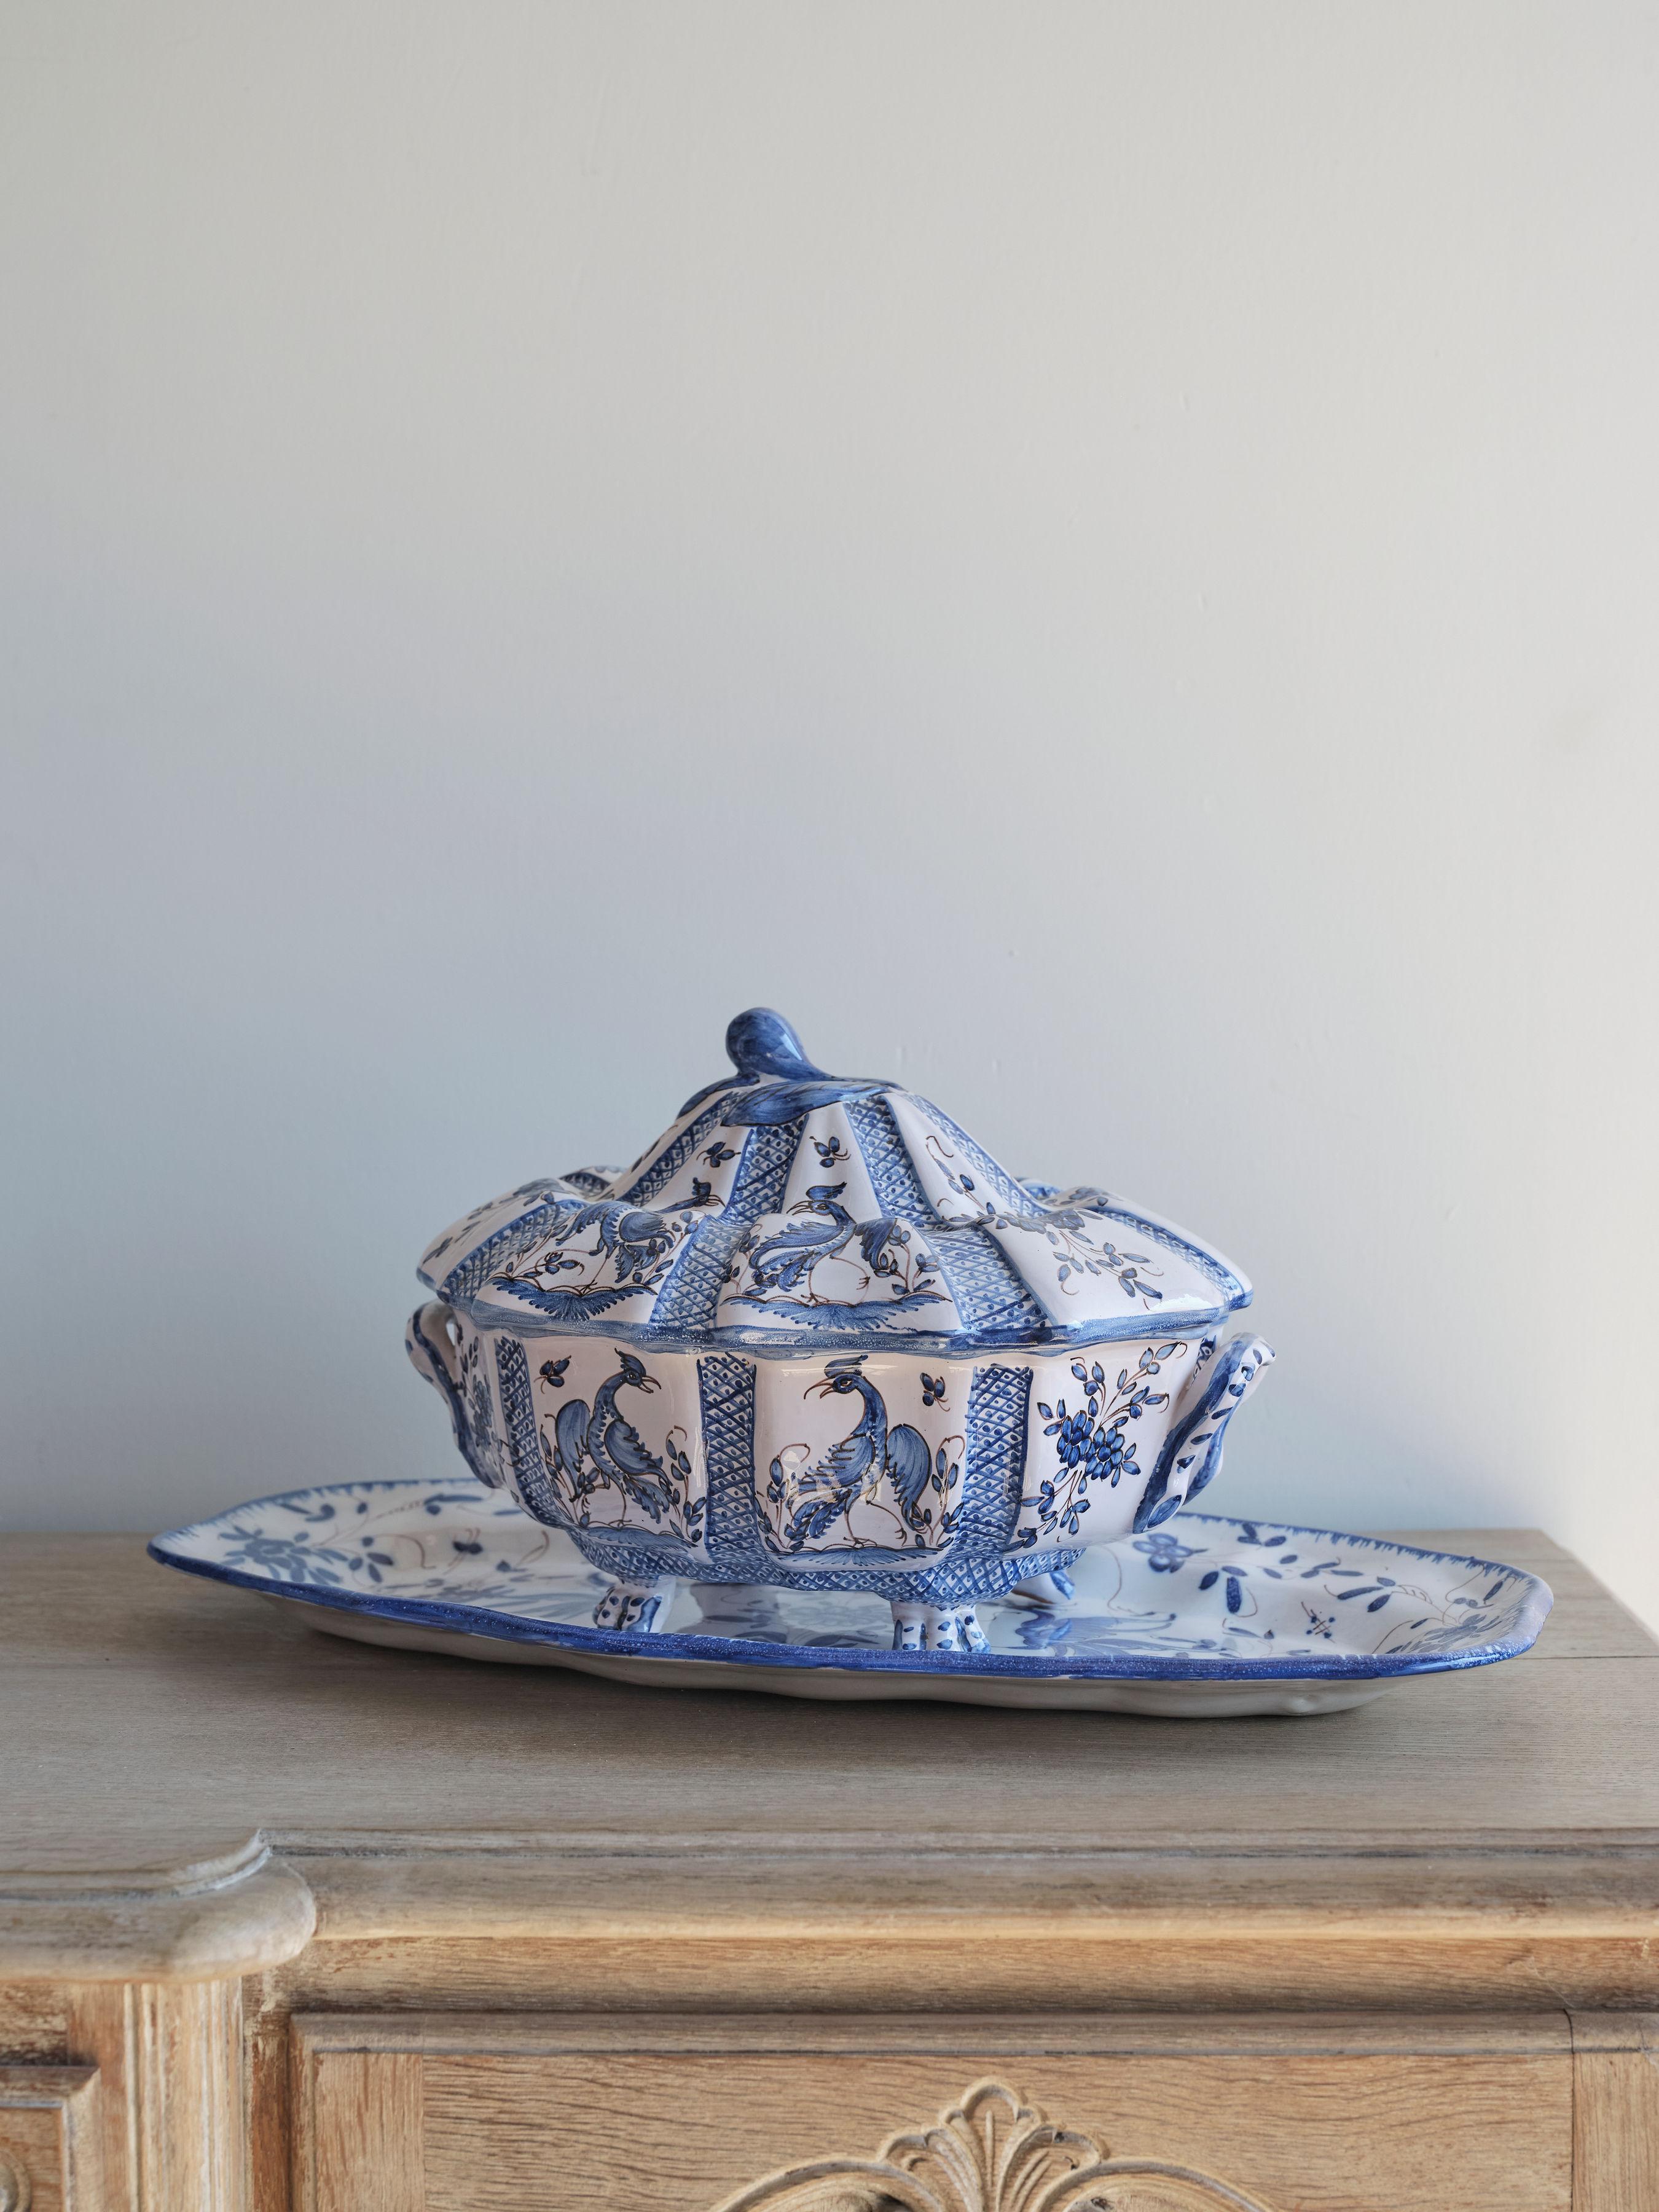 This lovely tureen and tray feature a Delft style of blue and white floral. There are also several peacocks featured on both the tray and tureen. The tureen has a handle on each side. These pieces were created in 1960, yet they are both in pristine